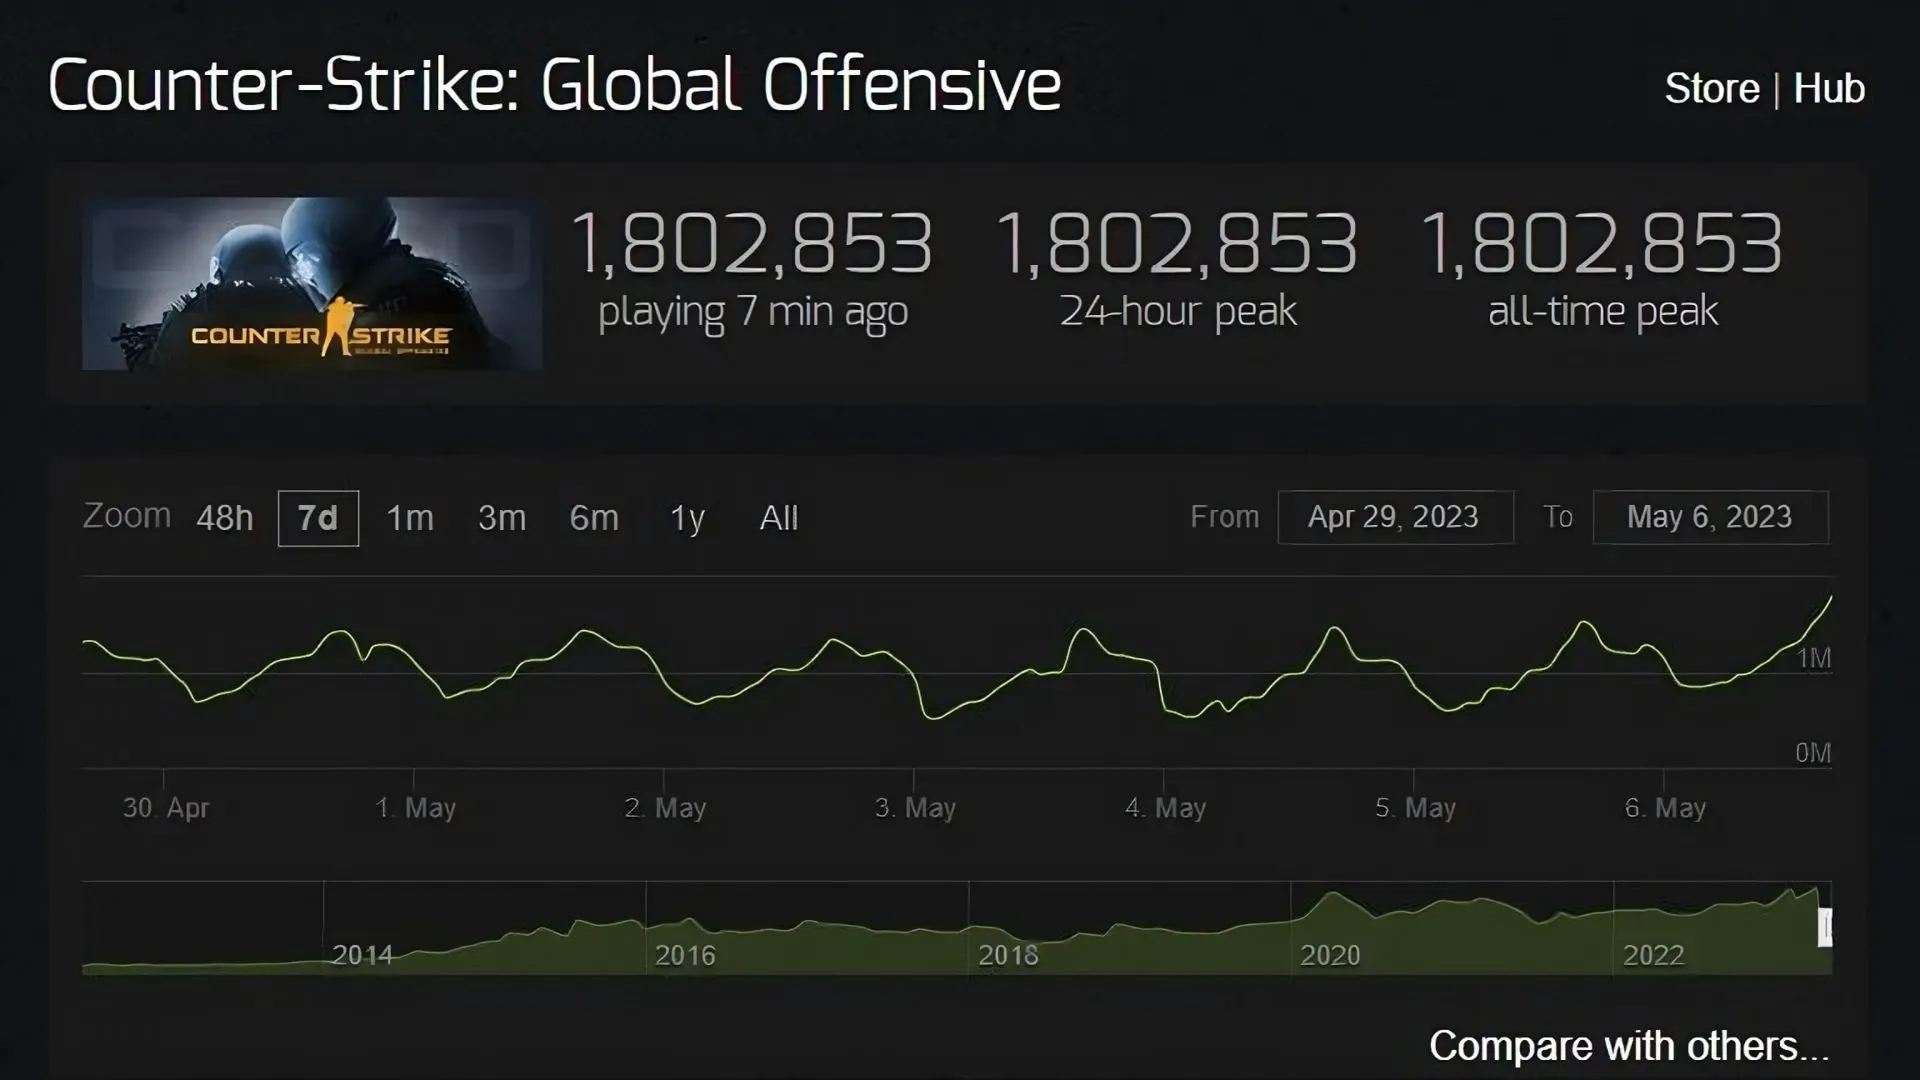 CS:GO has surpassed 1,8 million concurrent players and hit a new all-time high